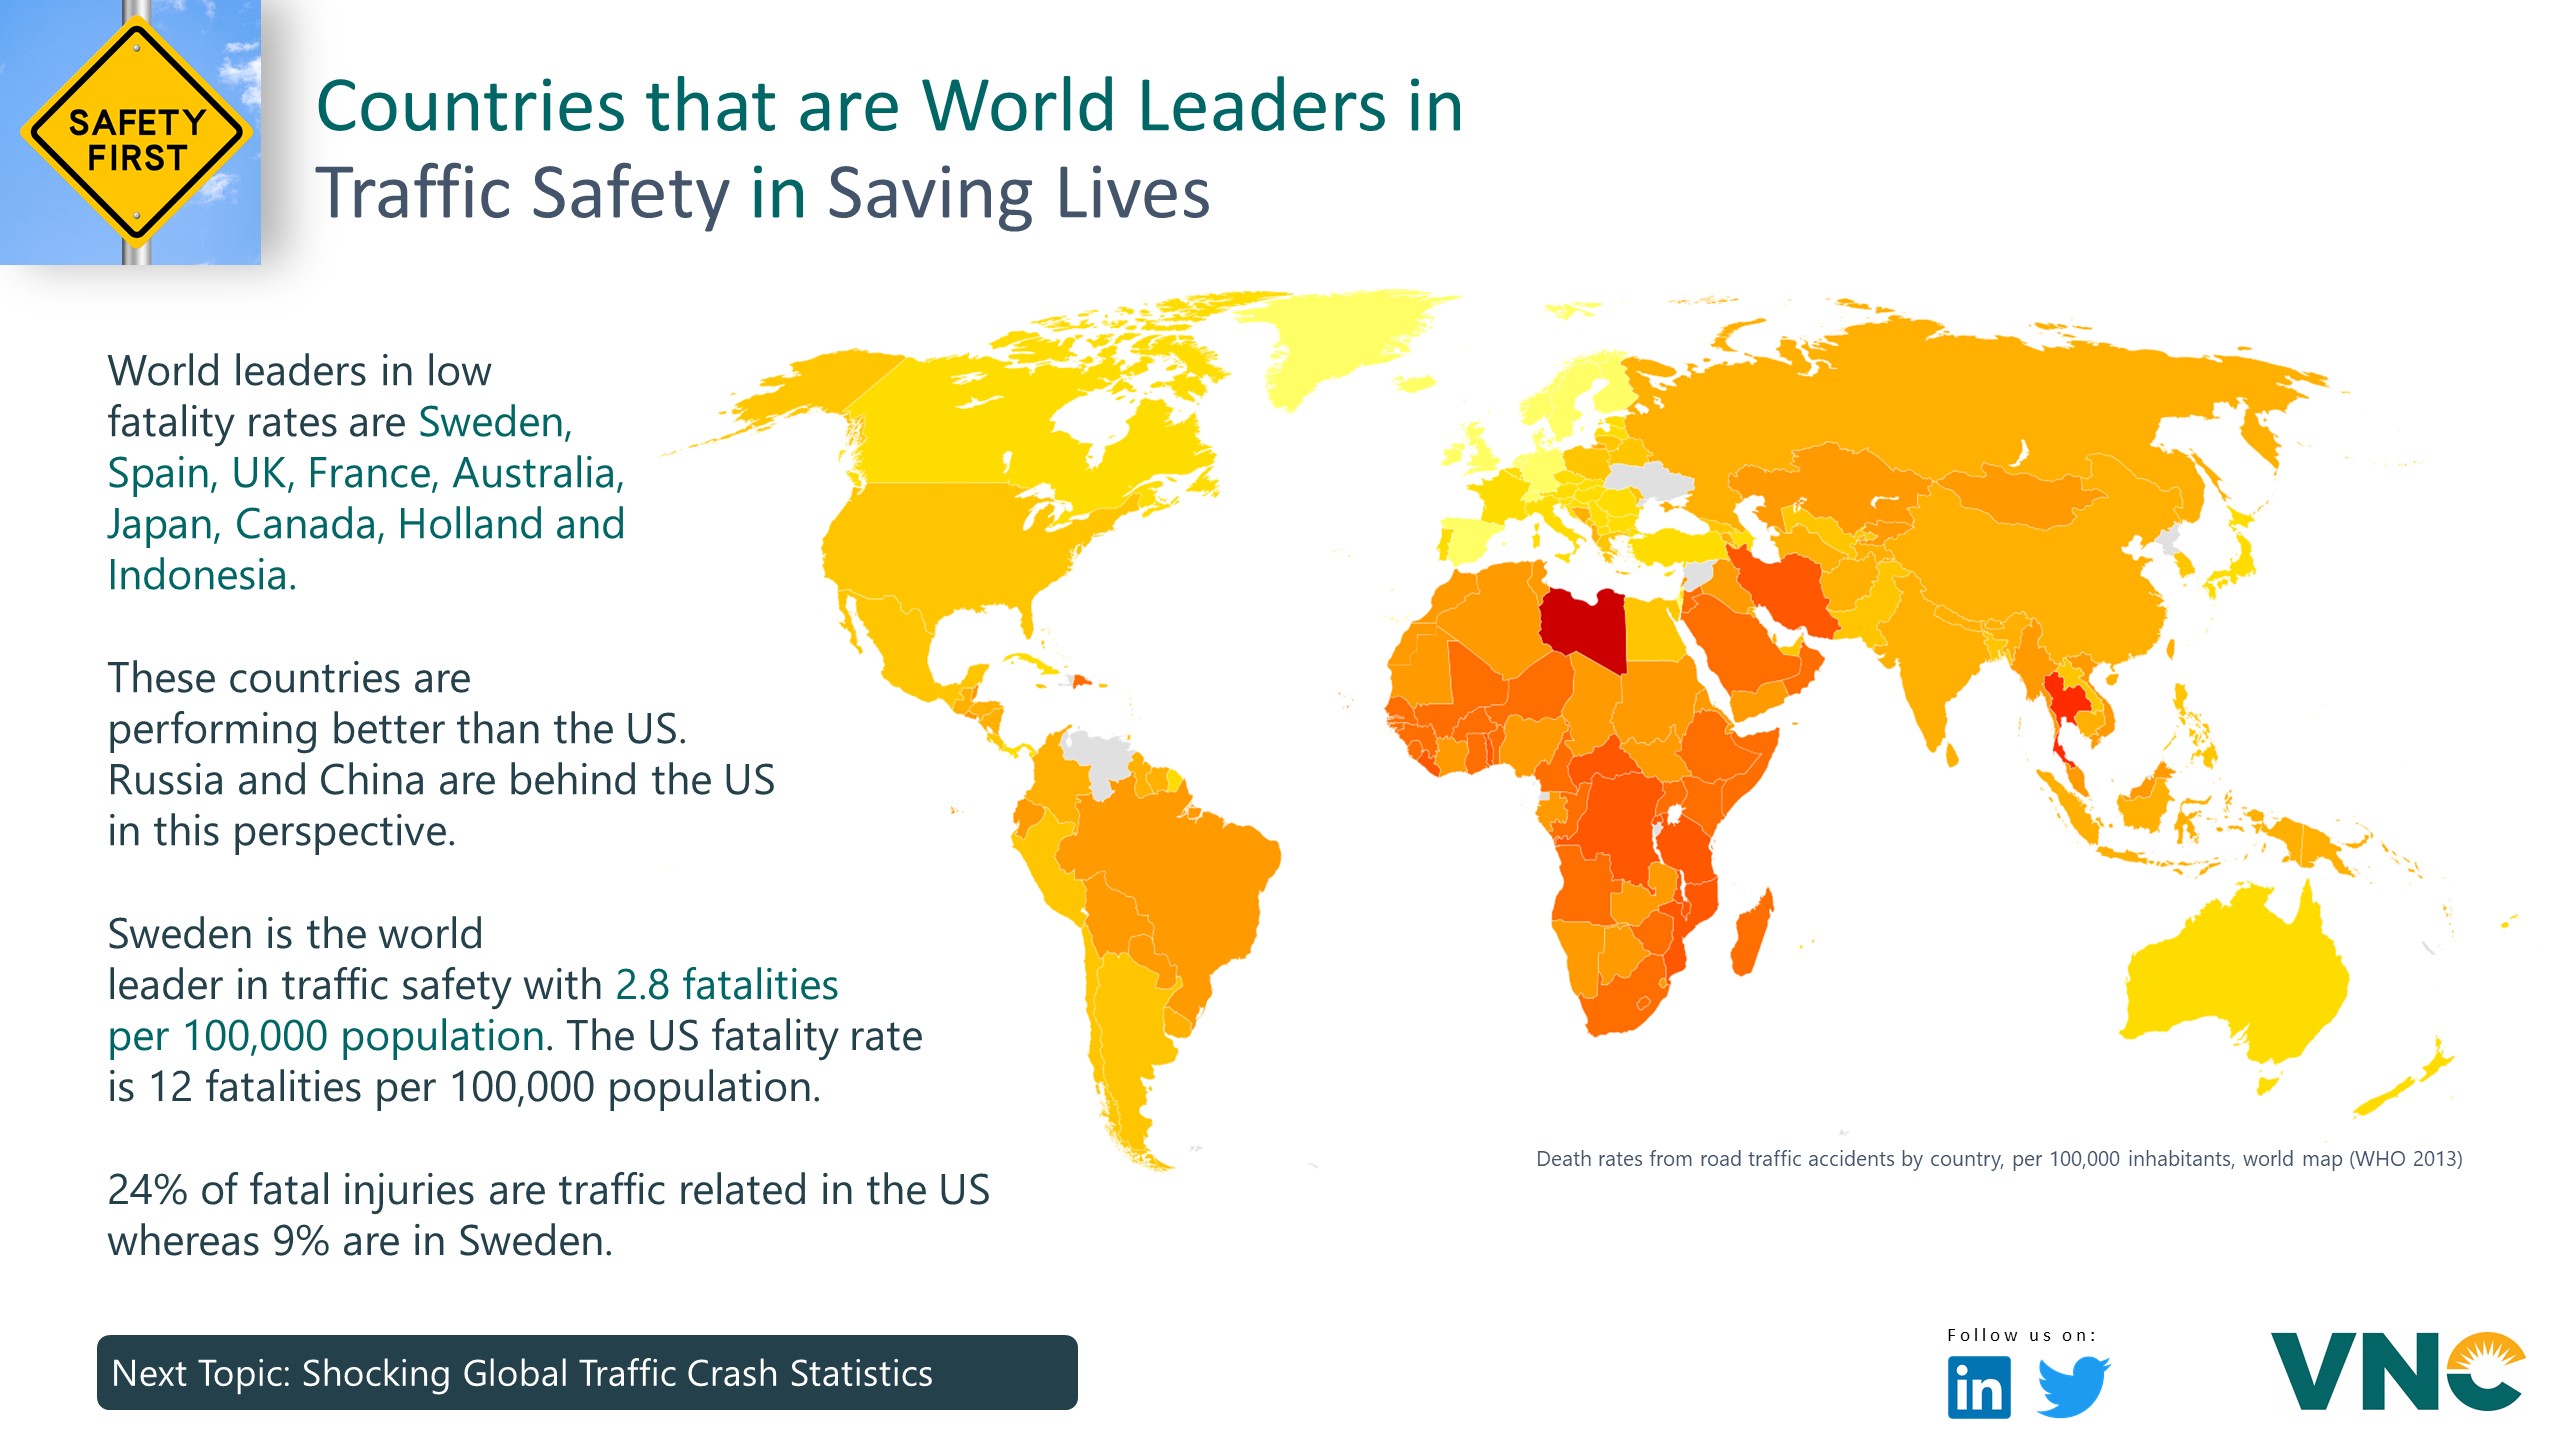 Countries that are World Leaders in Traffic Safety in Saving Lives